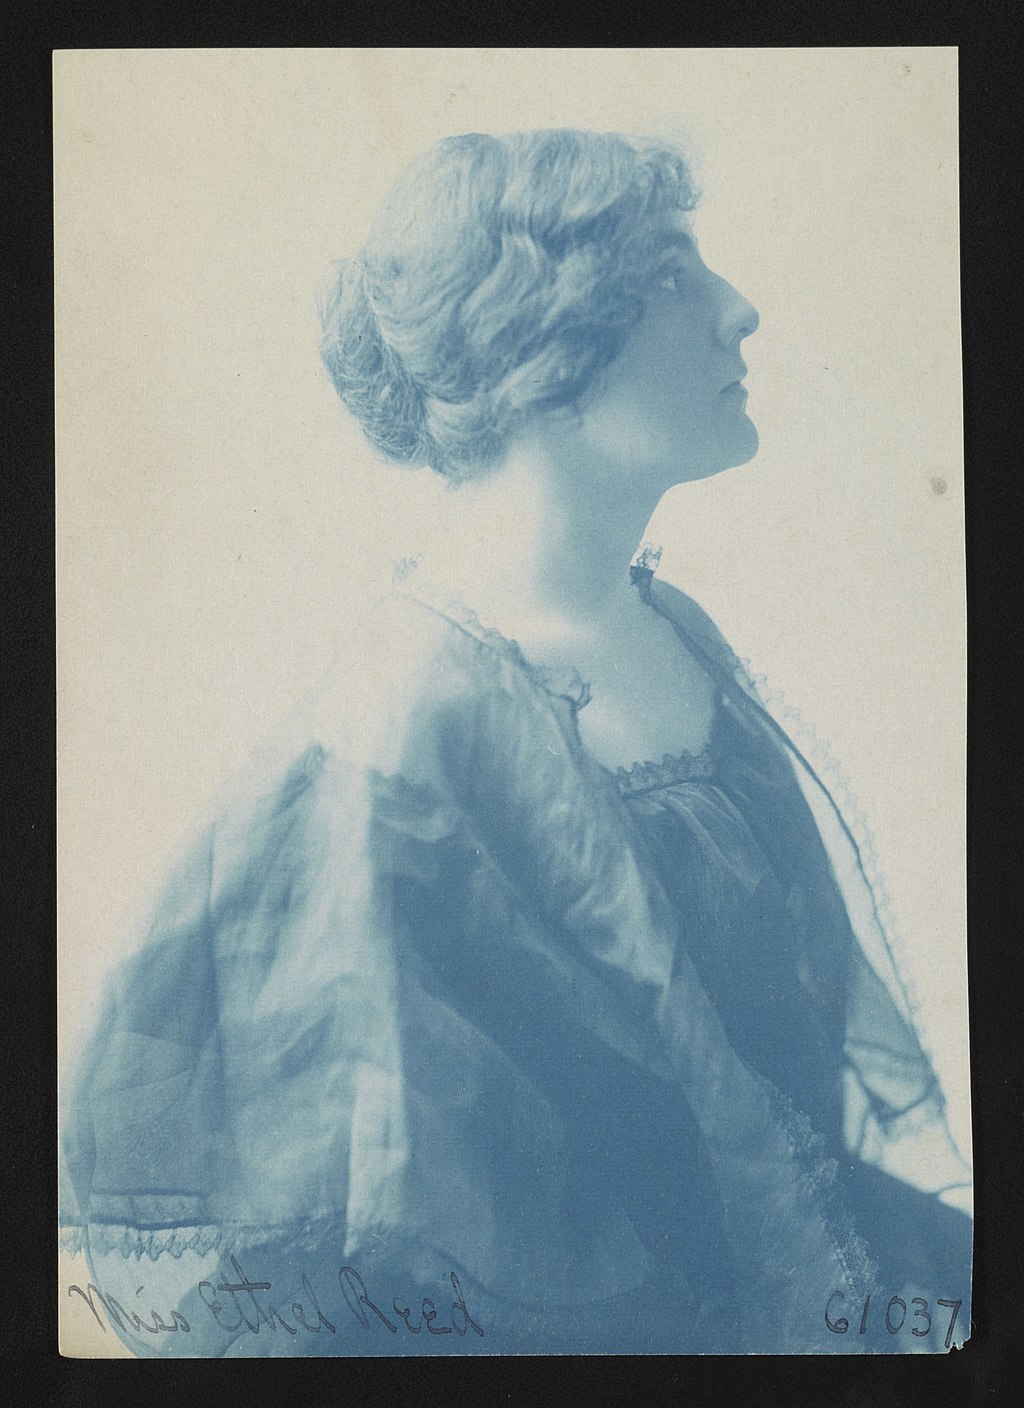 The gray-toned photograph shows Ethel Reed’s head and torso in profile, facing right. Her abundant hair is twisted back into a chignon; her face in profile is unsmiling. She is wearing a dark dress with a square neckline lined with lace. A semi-transparent cape with a lace edging covers her shoulders. A handwritten inscription at the bottom of the photograph reads: Miss Ethel Reed 61037.